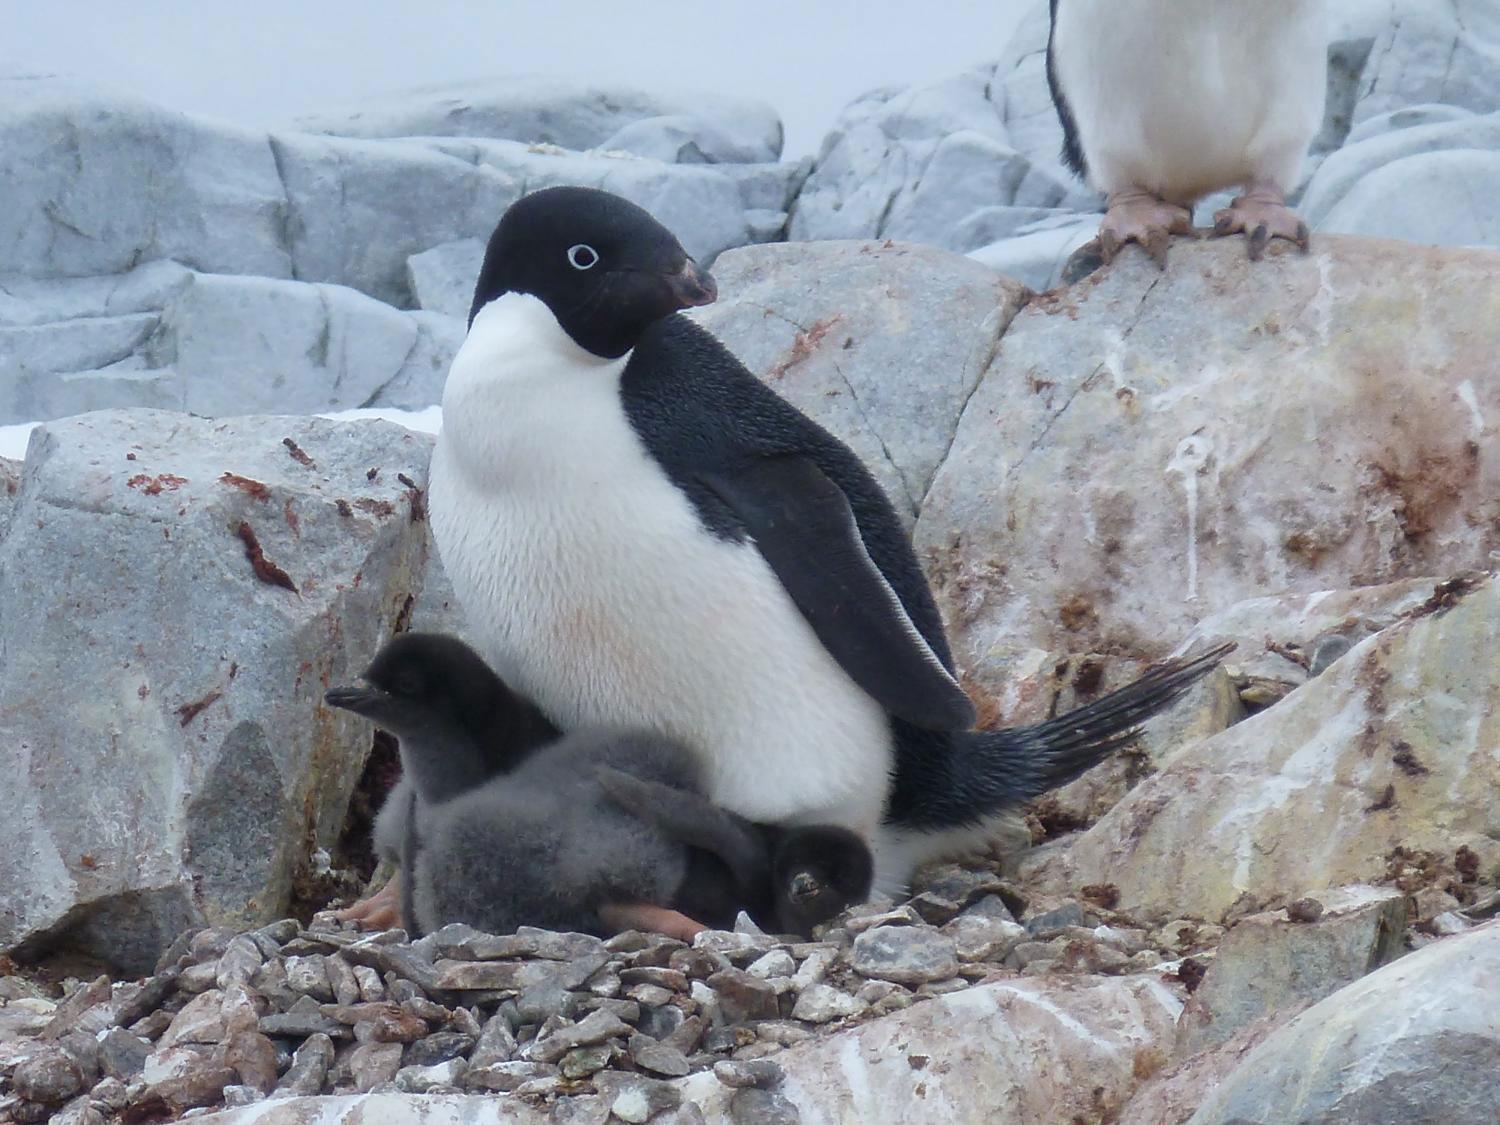 Rising sea surface temperatures mean Adélie penguins have difficulty rearing chicks